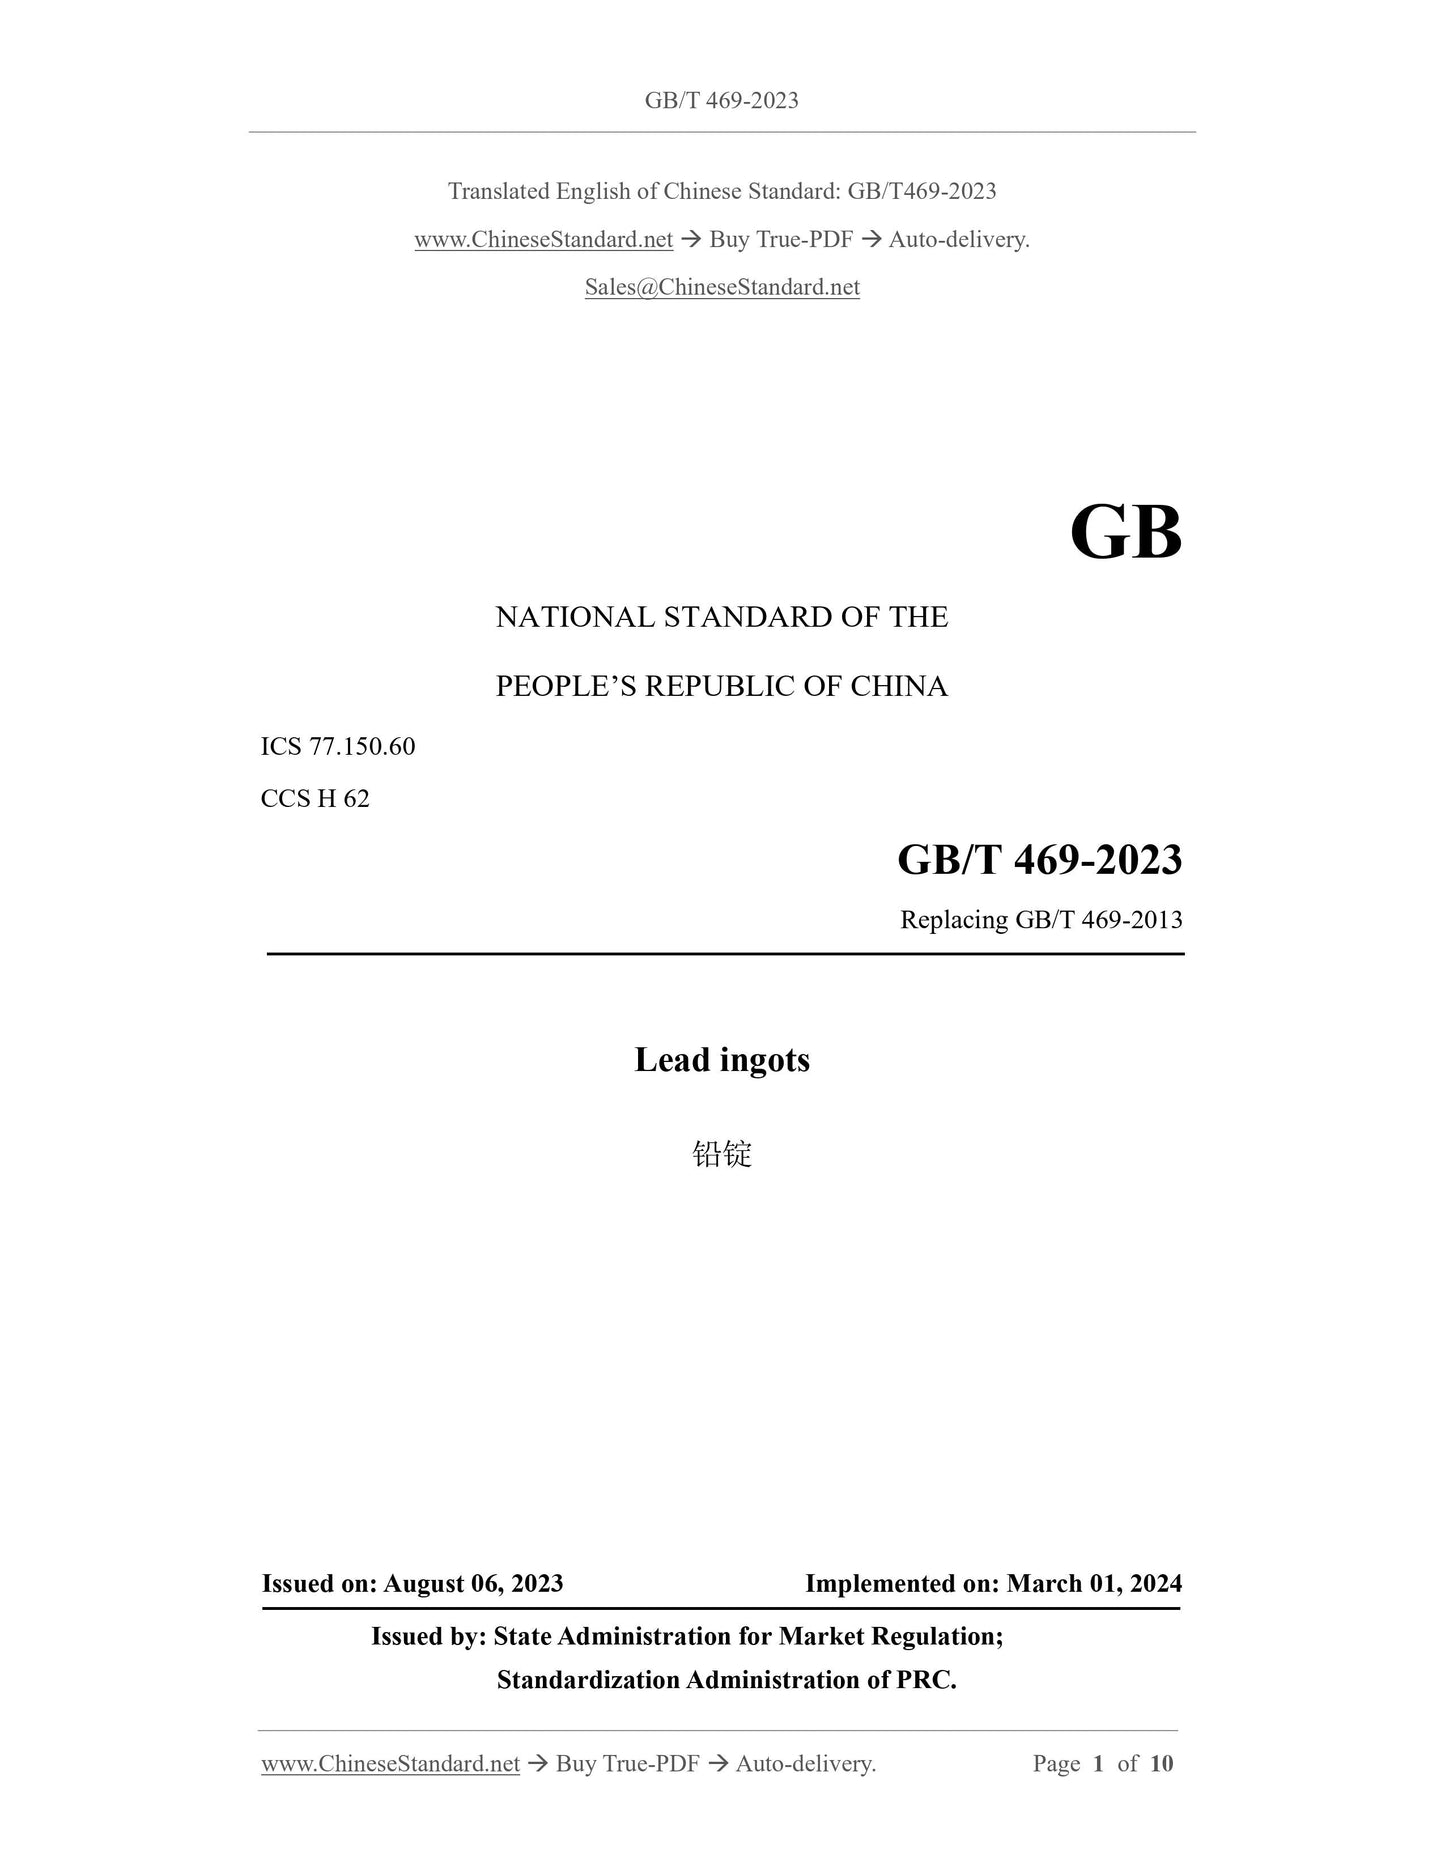 GB/T 469-2023 Page 1